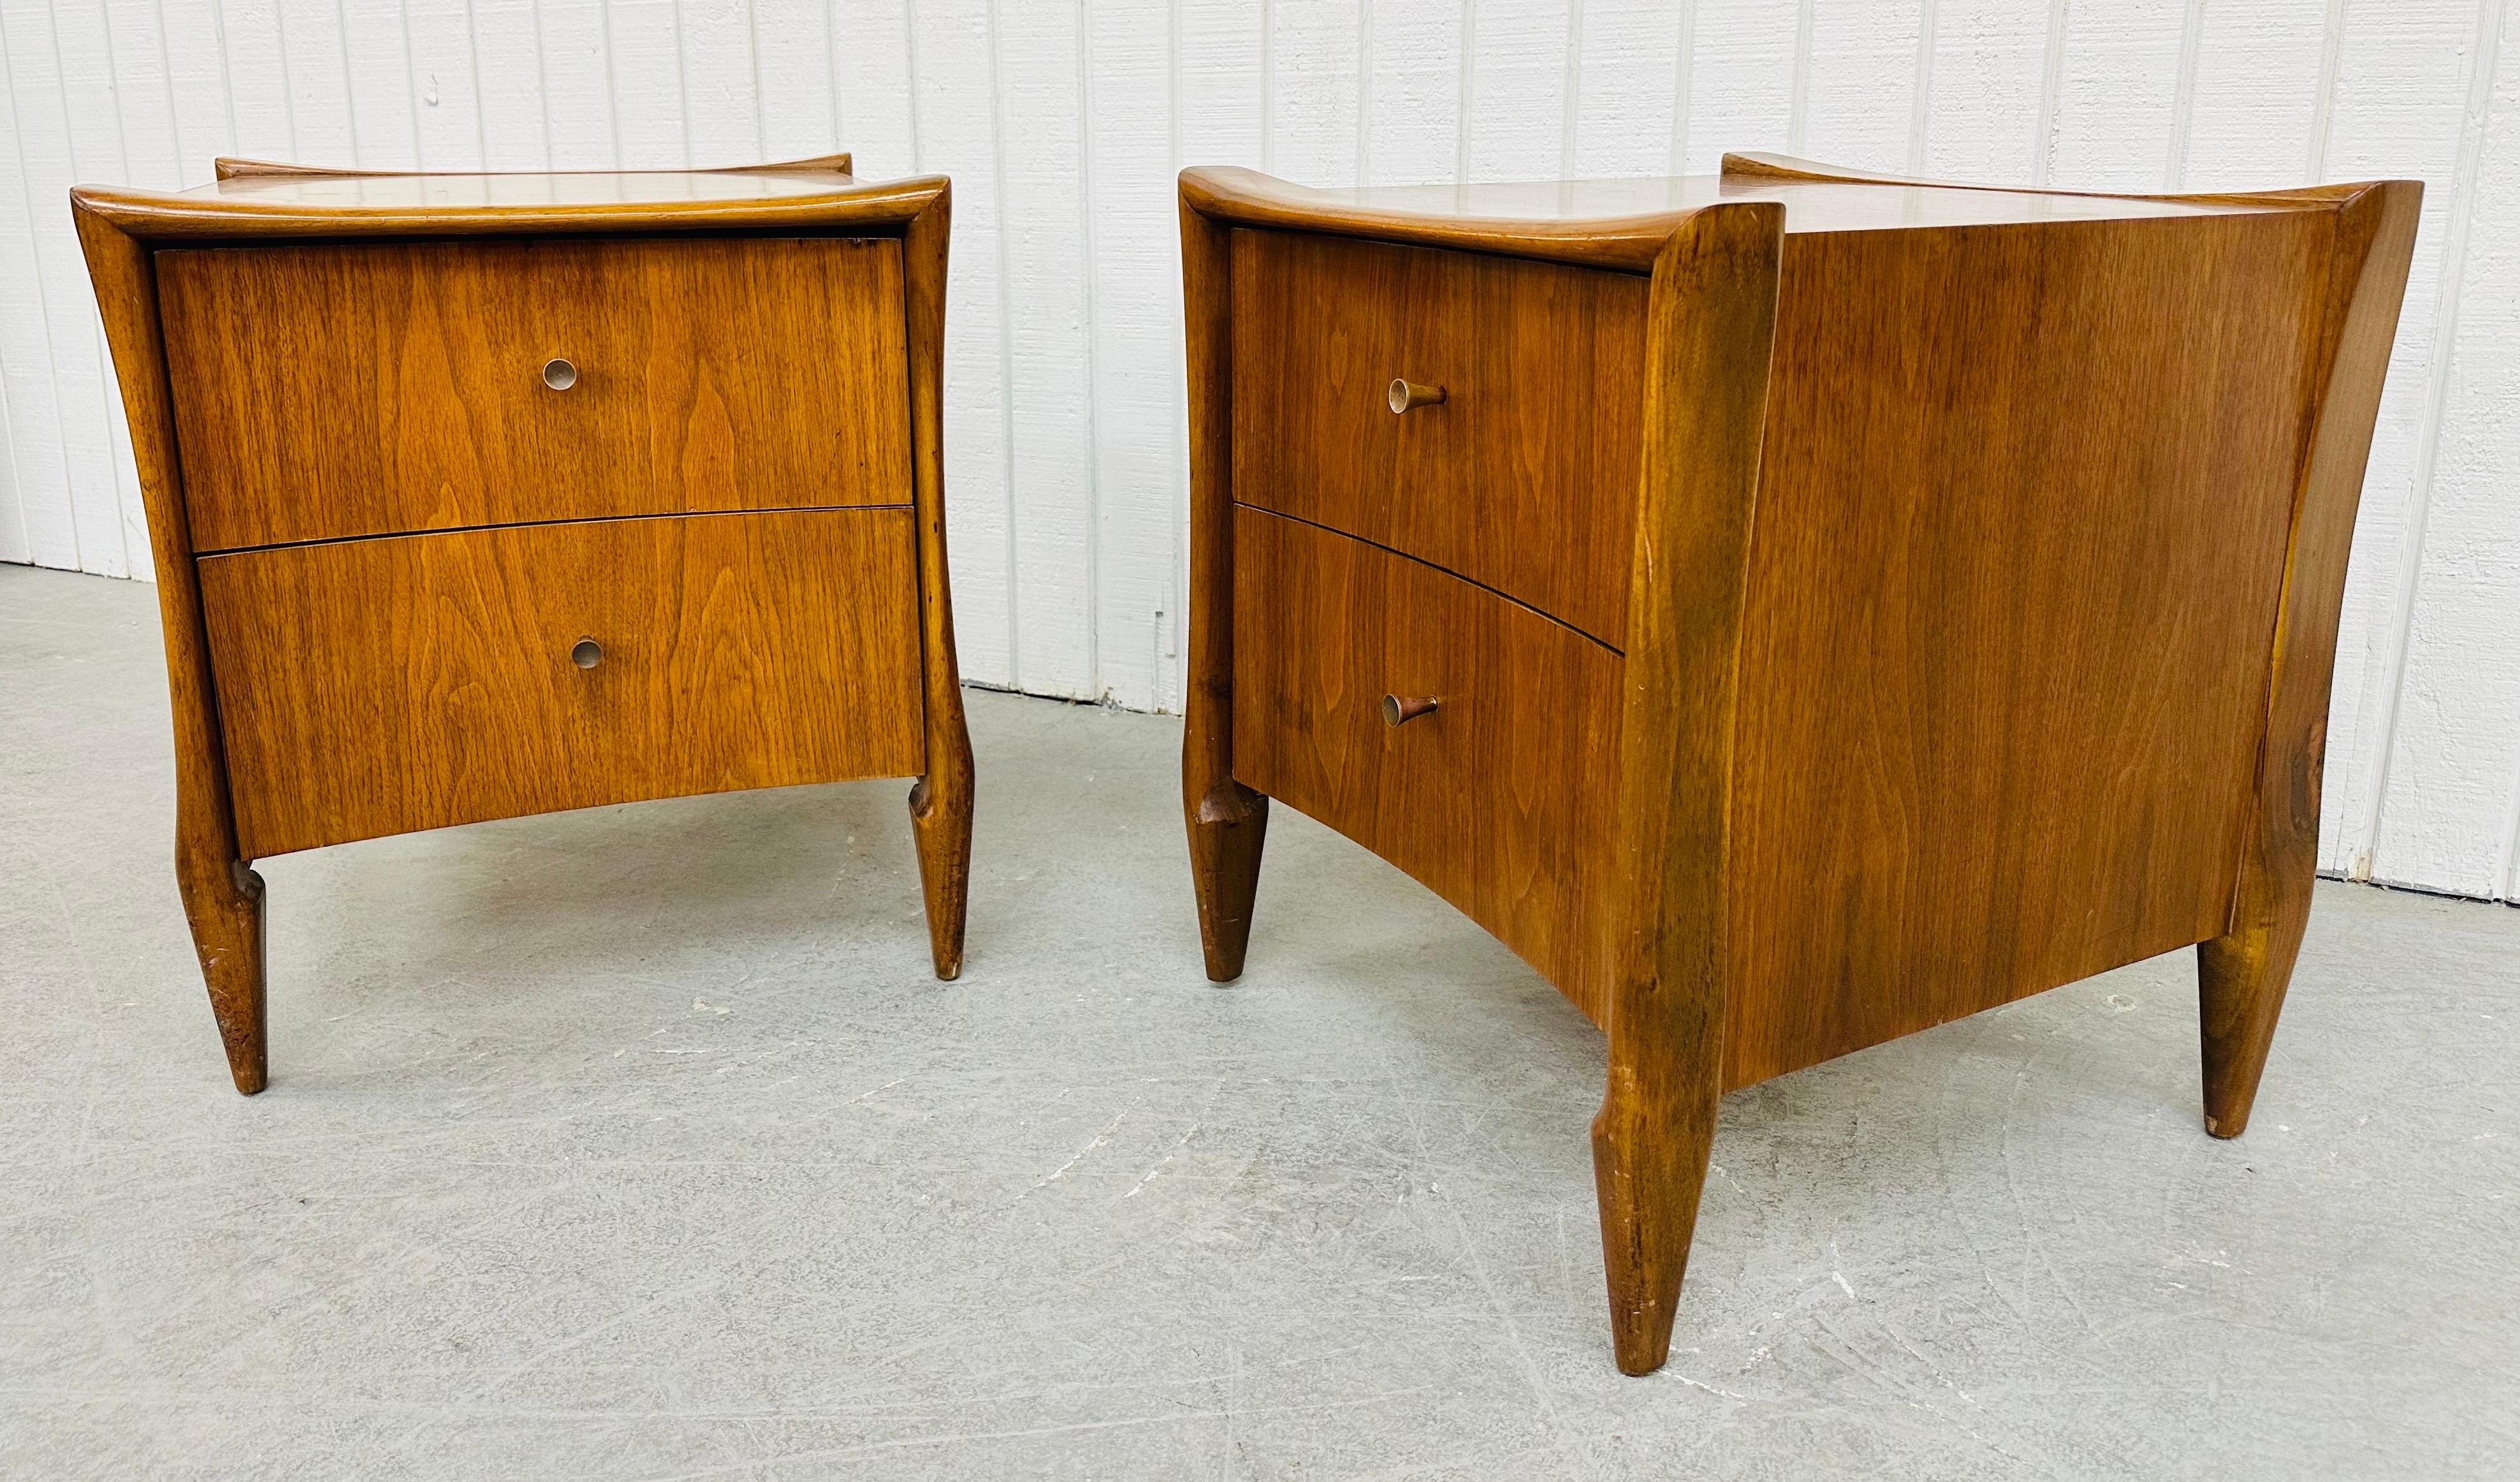 This listing is for a pair of Mid-Century Modern Sculptural Walnut Nightstands. Featuring a straight line design, two drawers for storage, original hardware, and a beautiful walnut finish. This is an exceptional combination of quality and design!